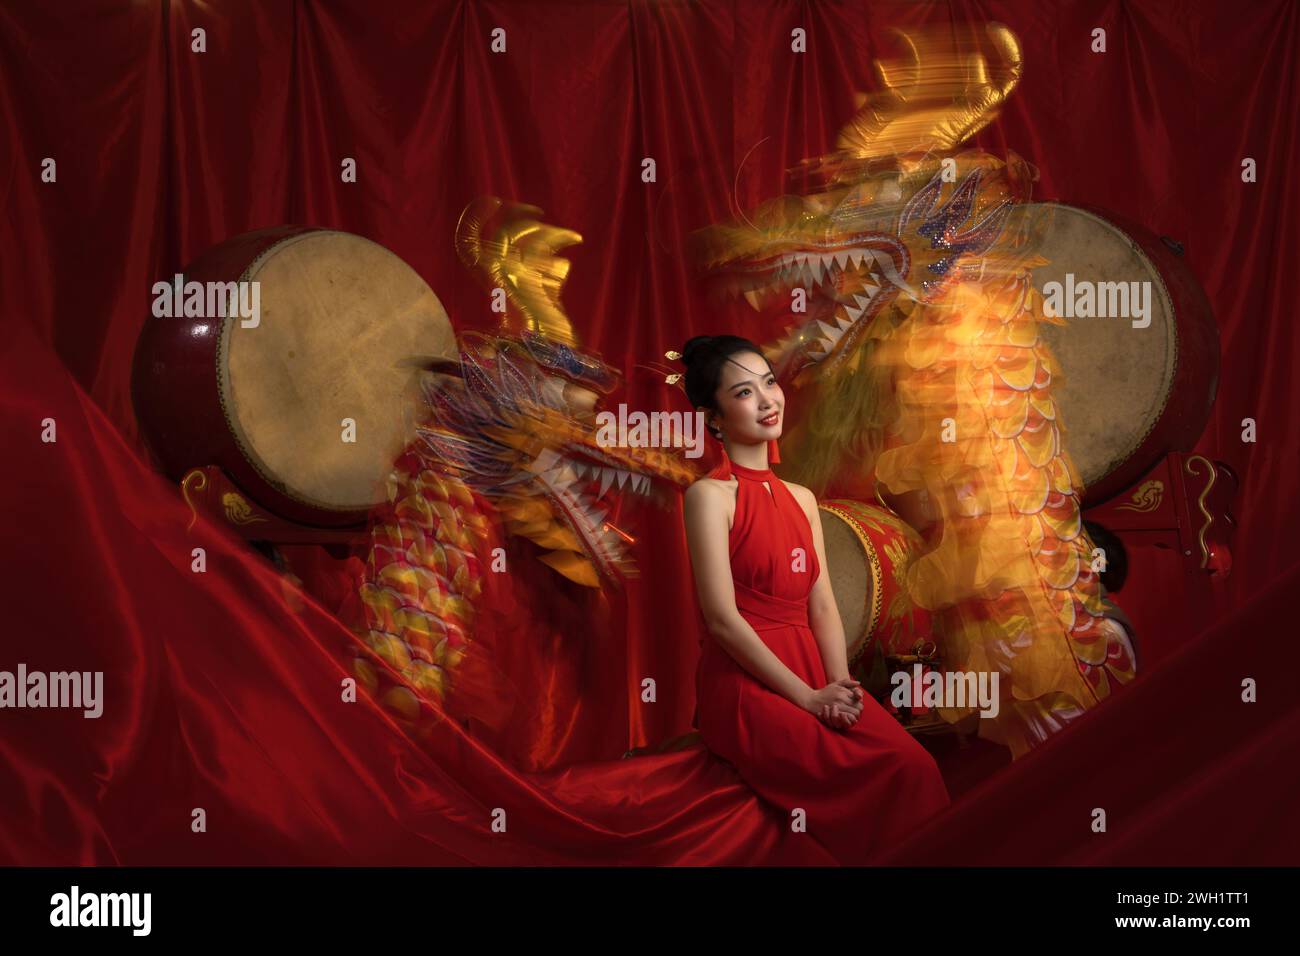 Dragon Year and New Year atmosphere, celebrated by an Asian young woman Stock Photo